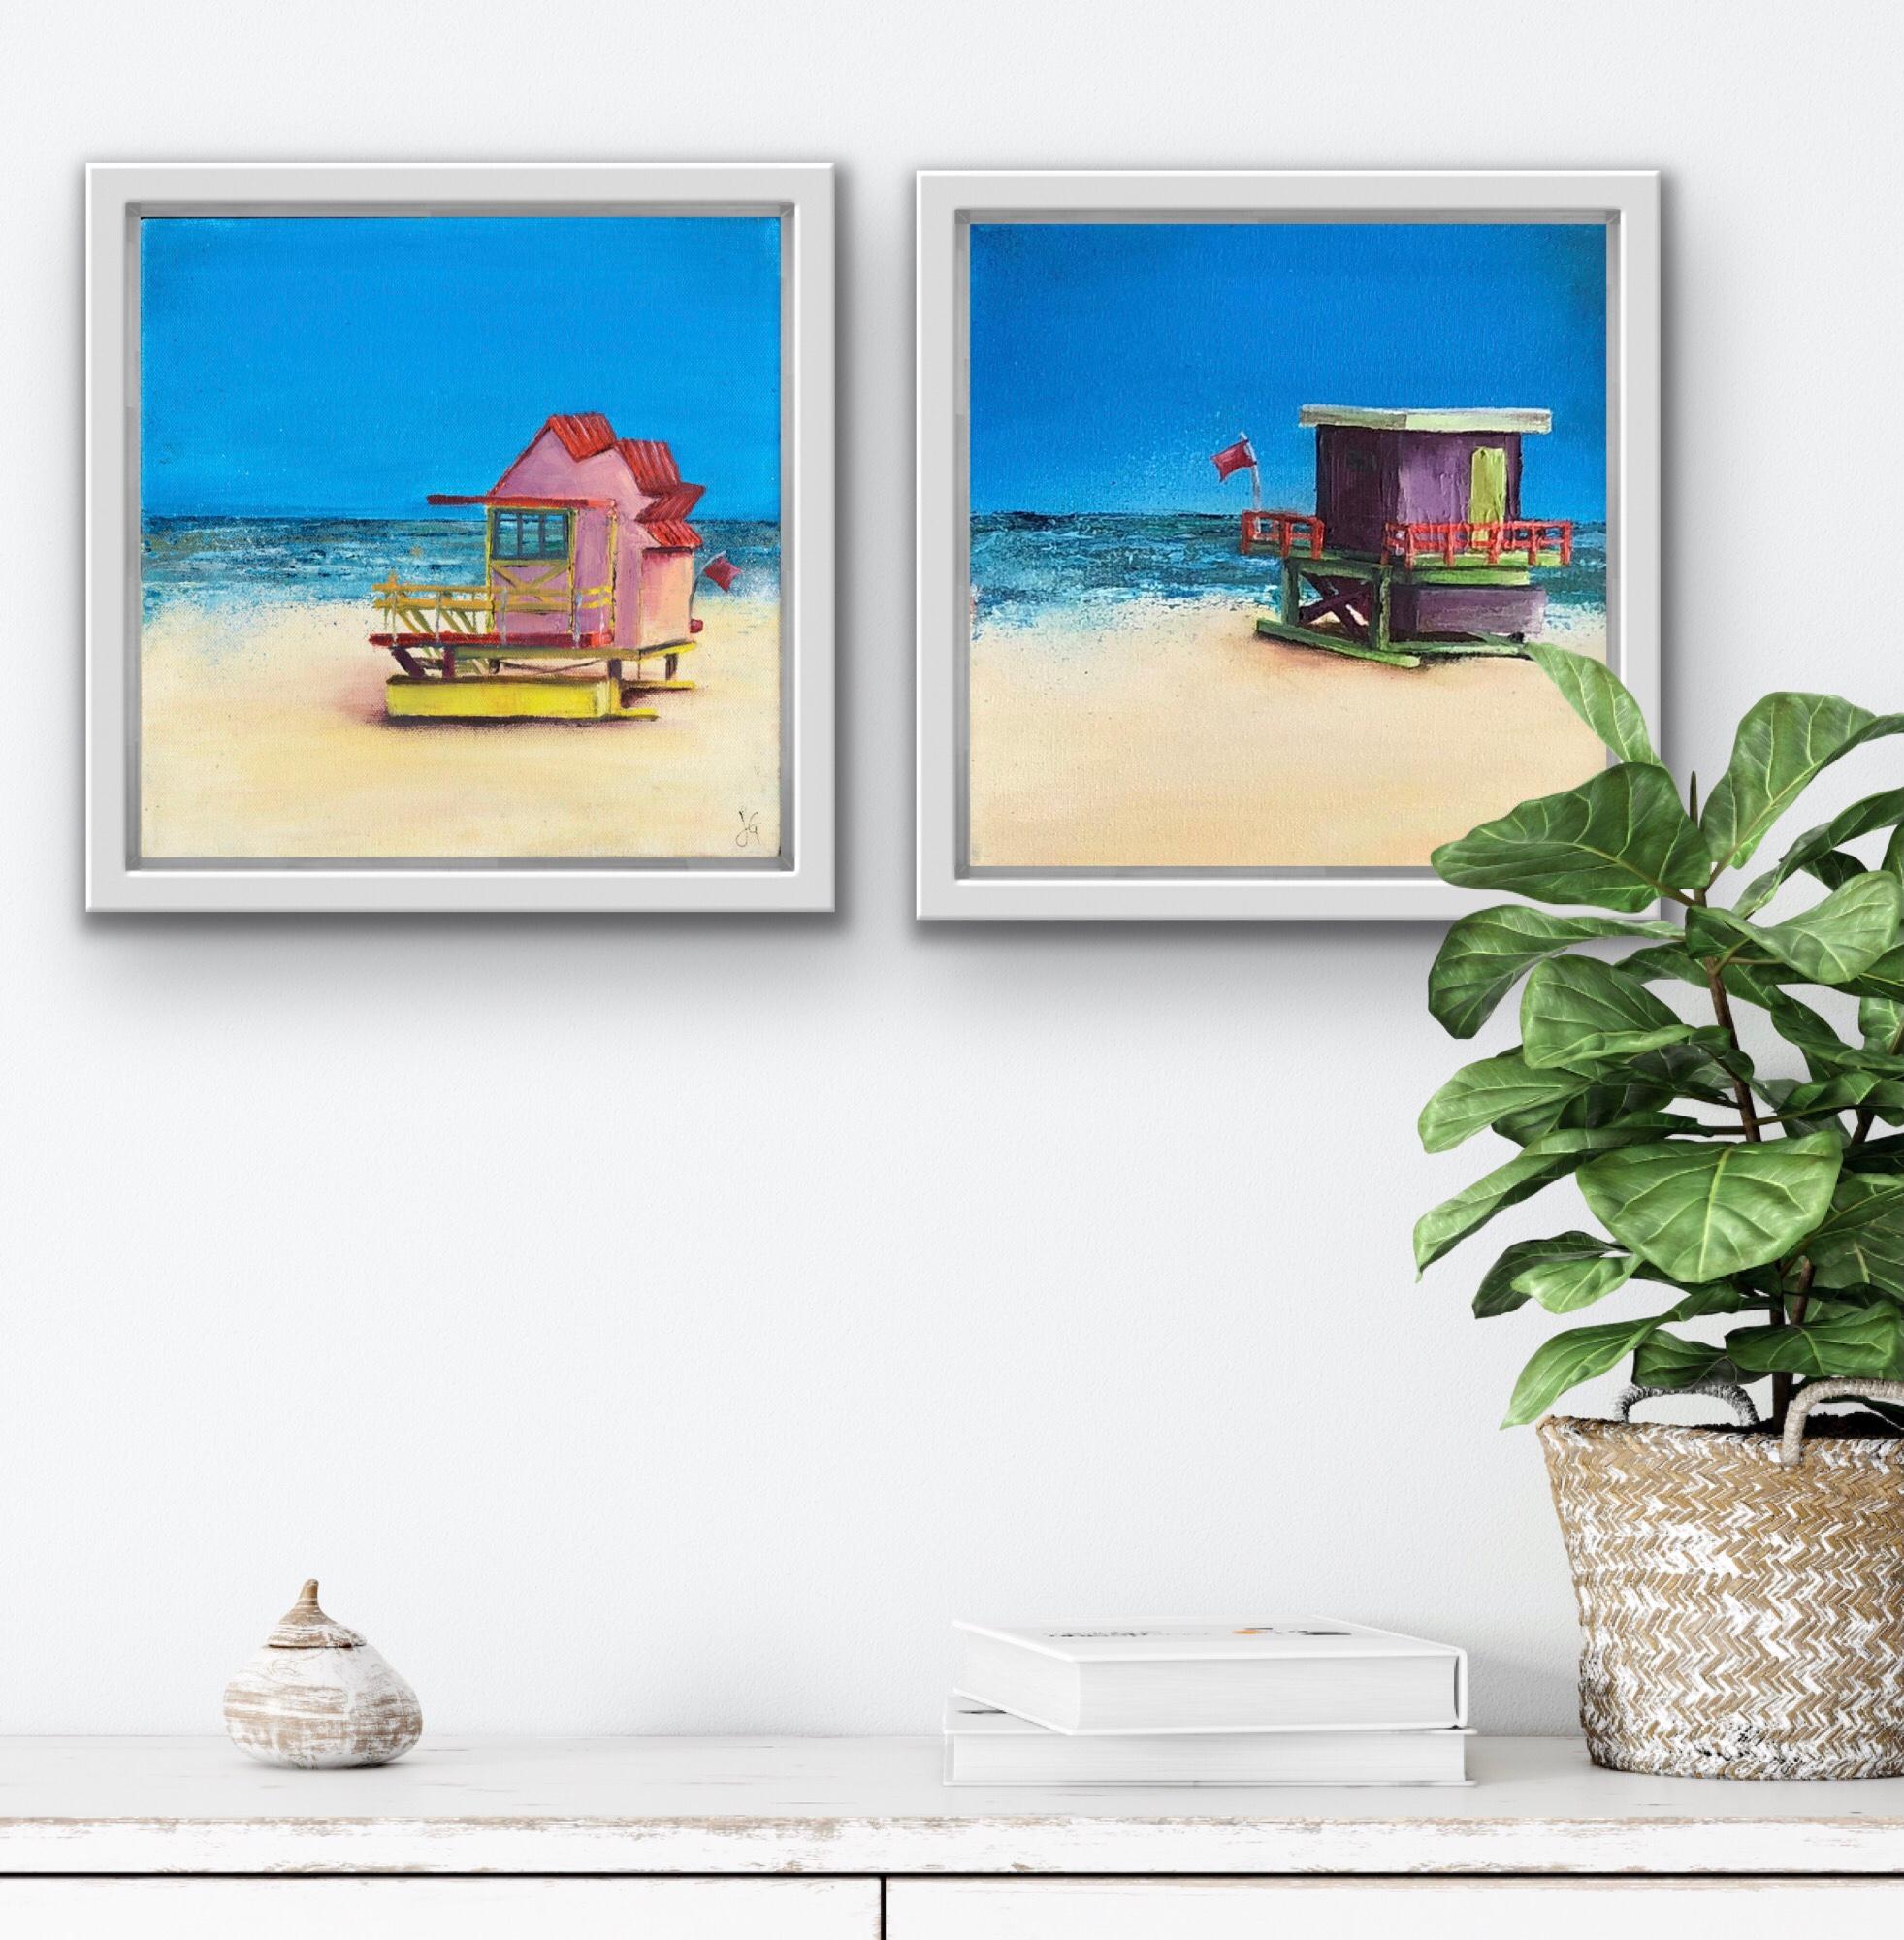 BEACH HUT PURPLE and BEACH HUT PURPLE diptych - Painting by Janette George